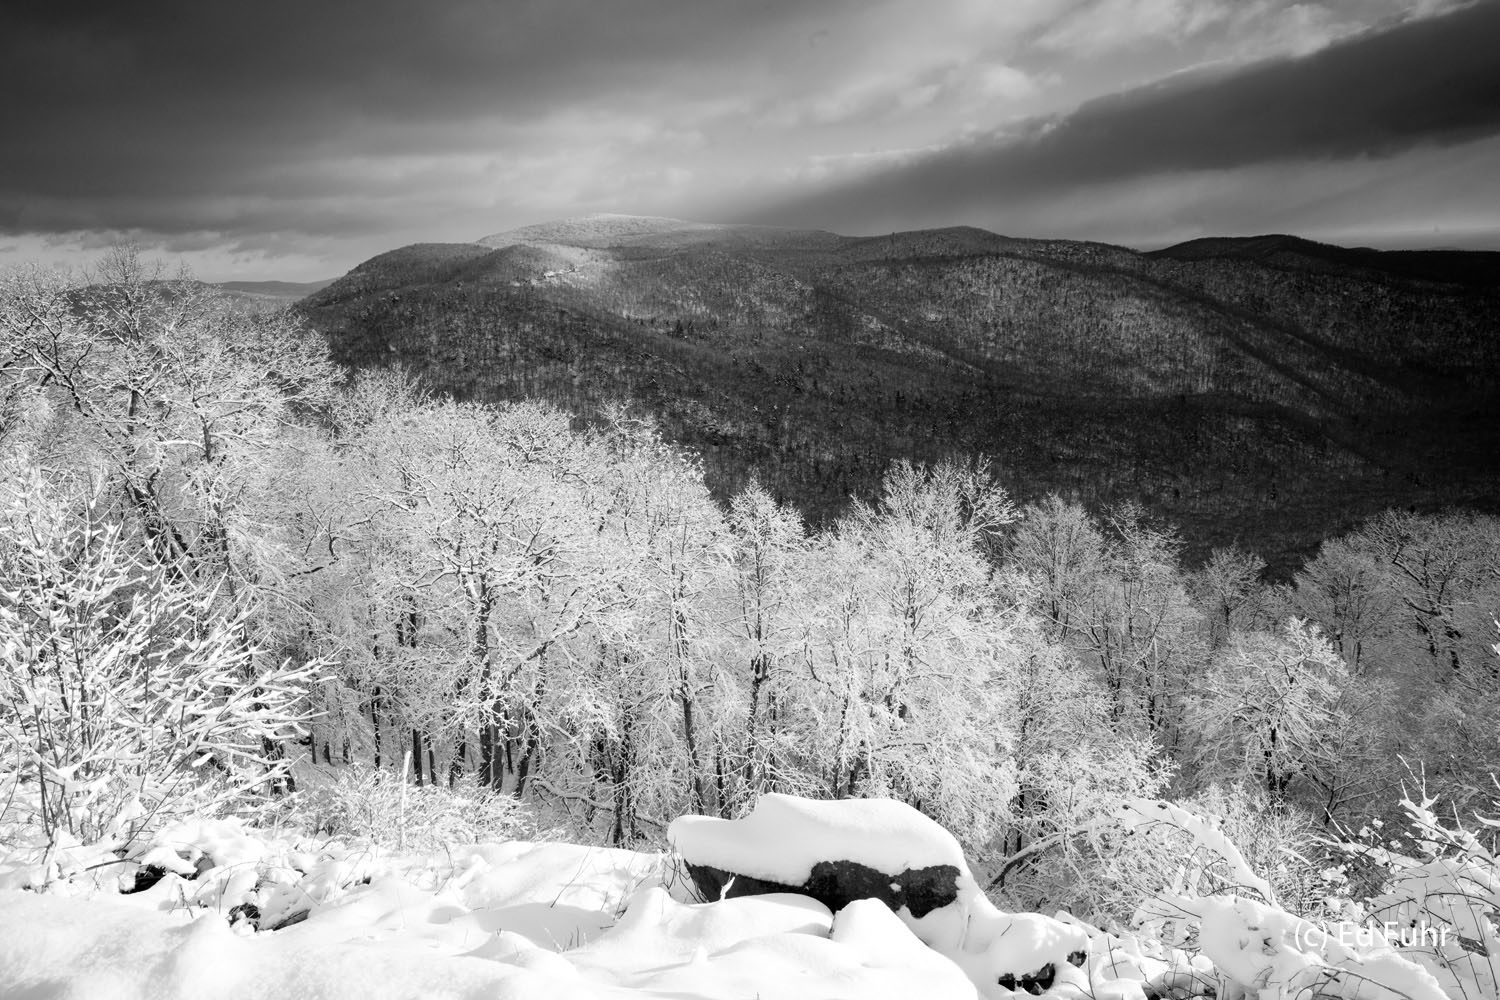 Stony Man Mountain rises in the distance following a day of heavy snow.  The vista is reminiscent of images captured more than...